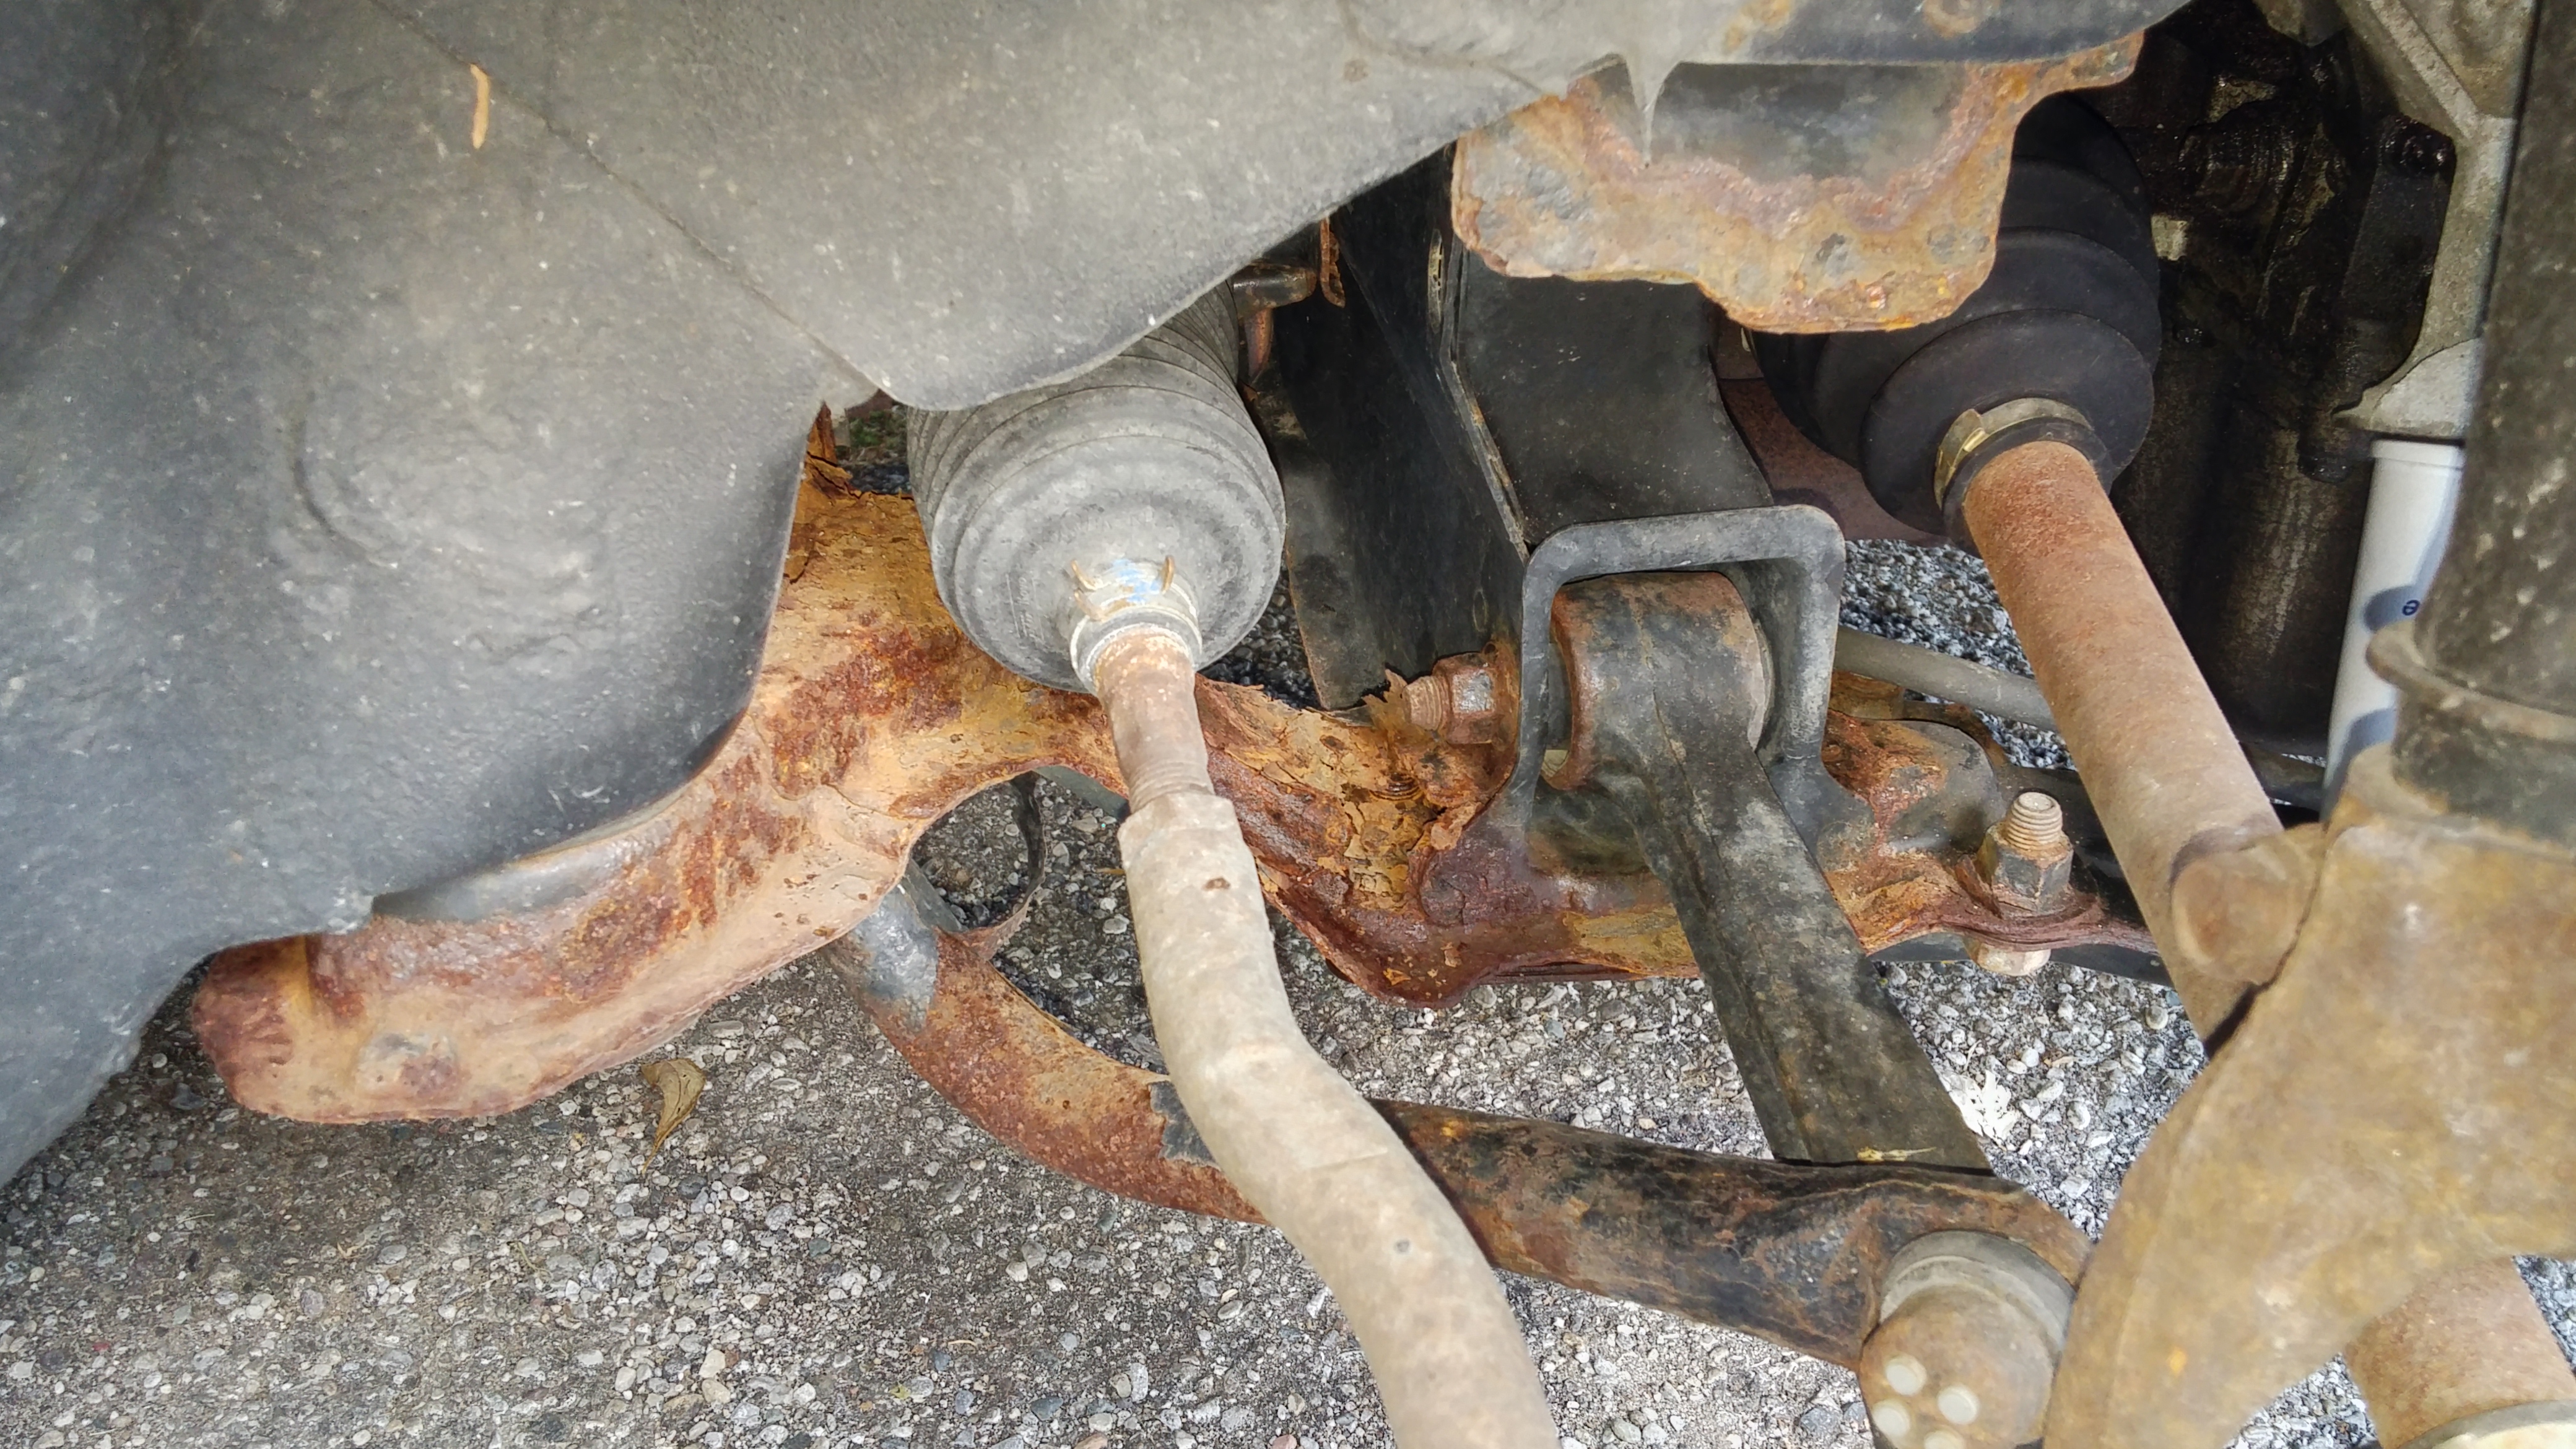 1999 Accord Rust, is this bad (structural?? HondaTech